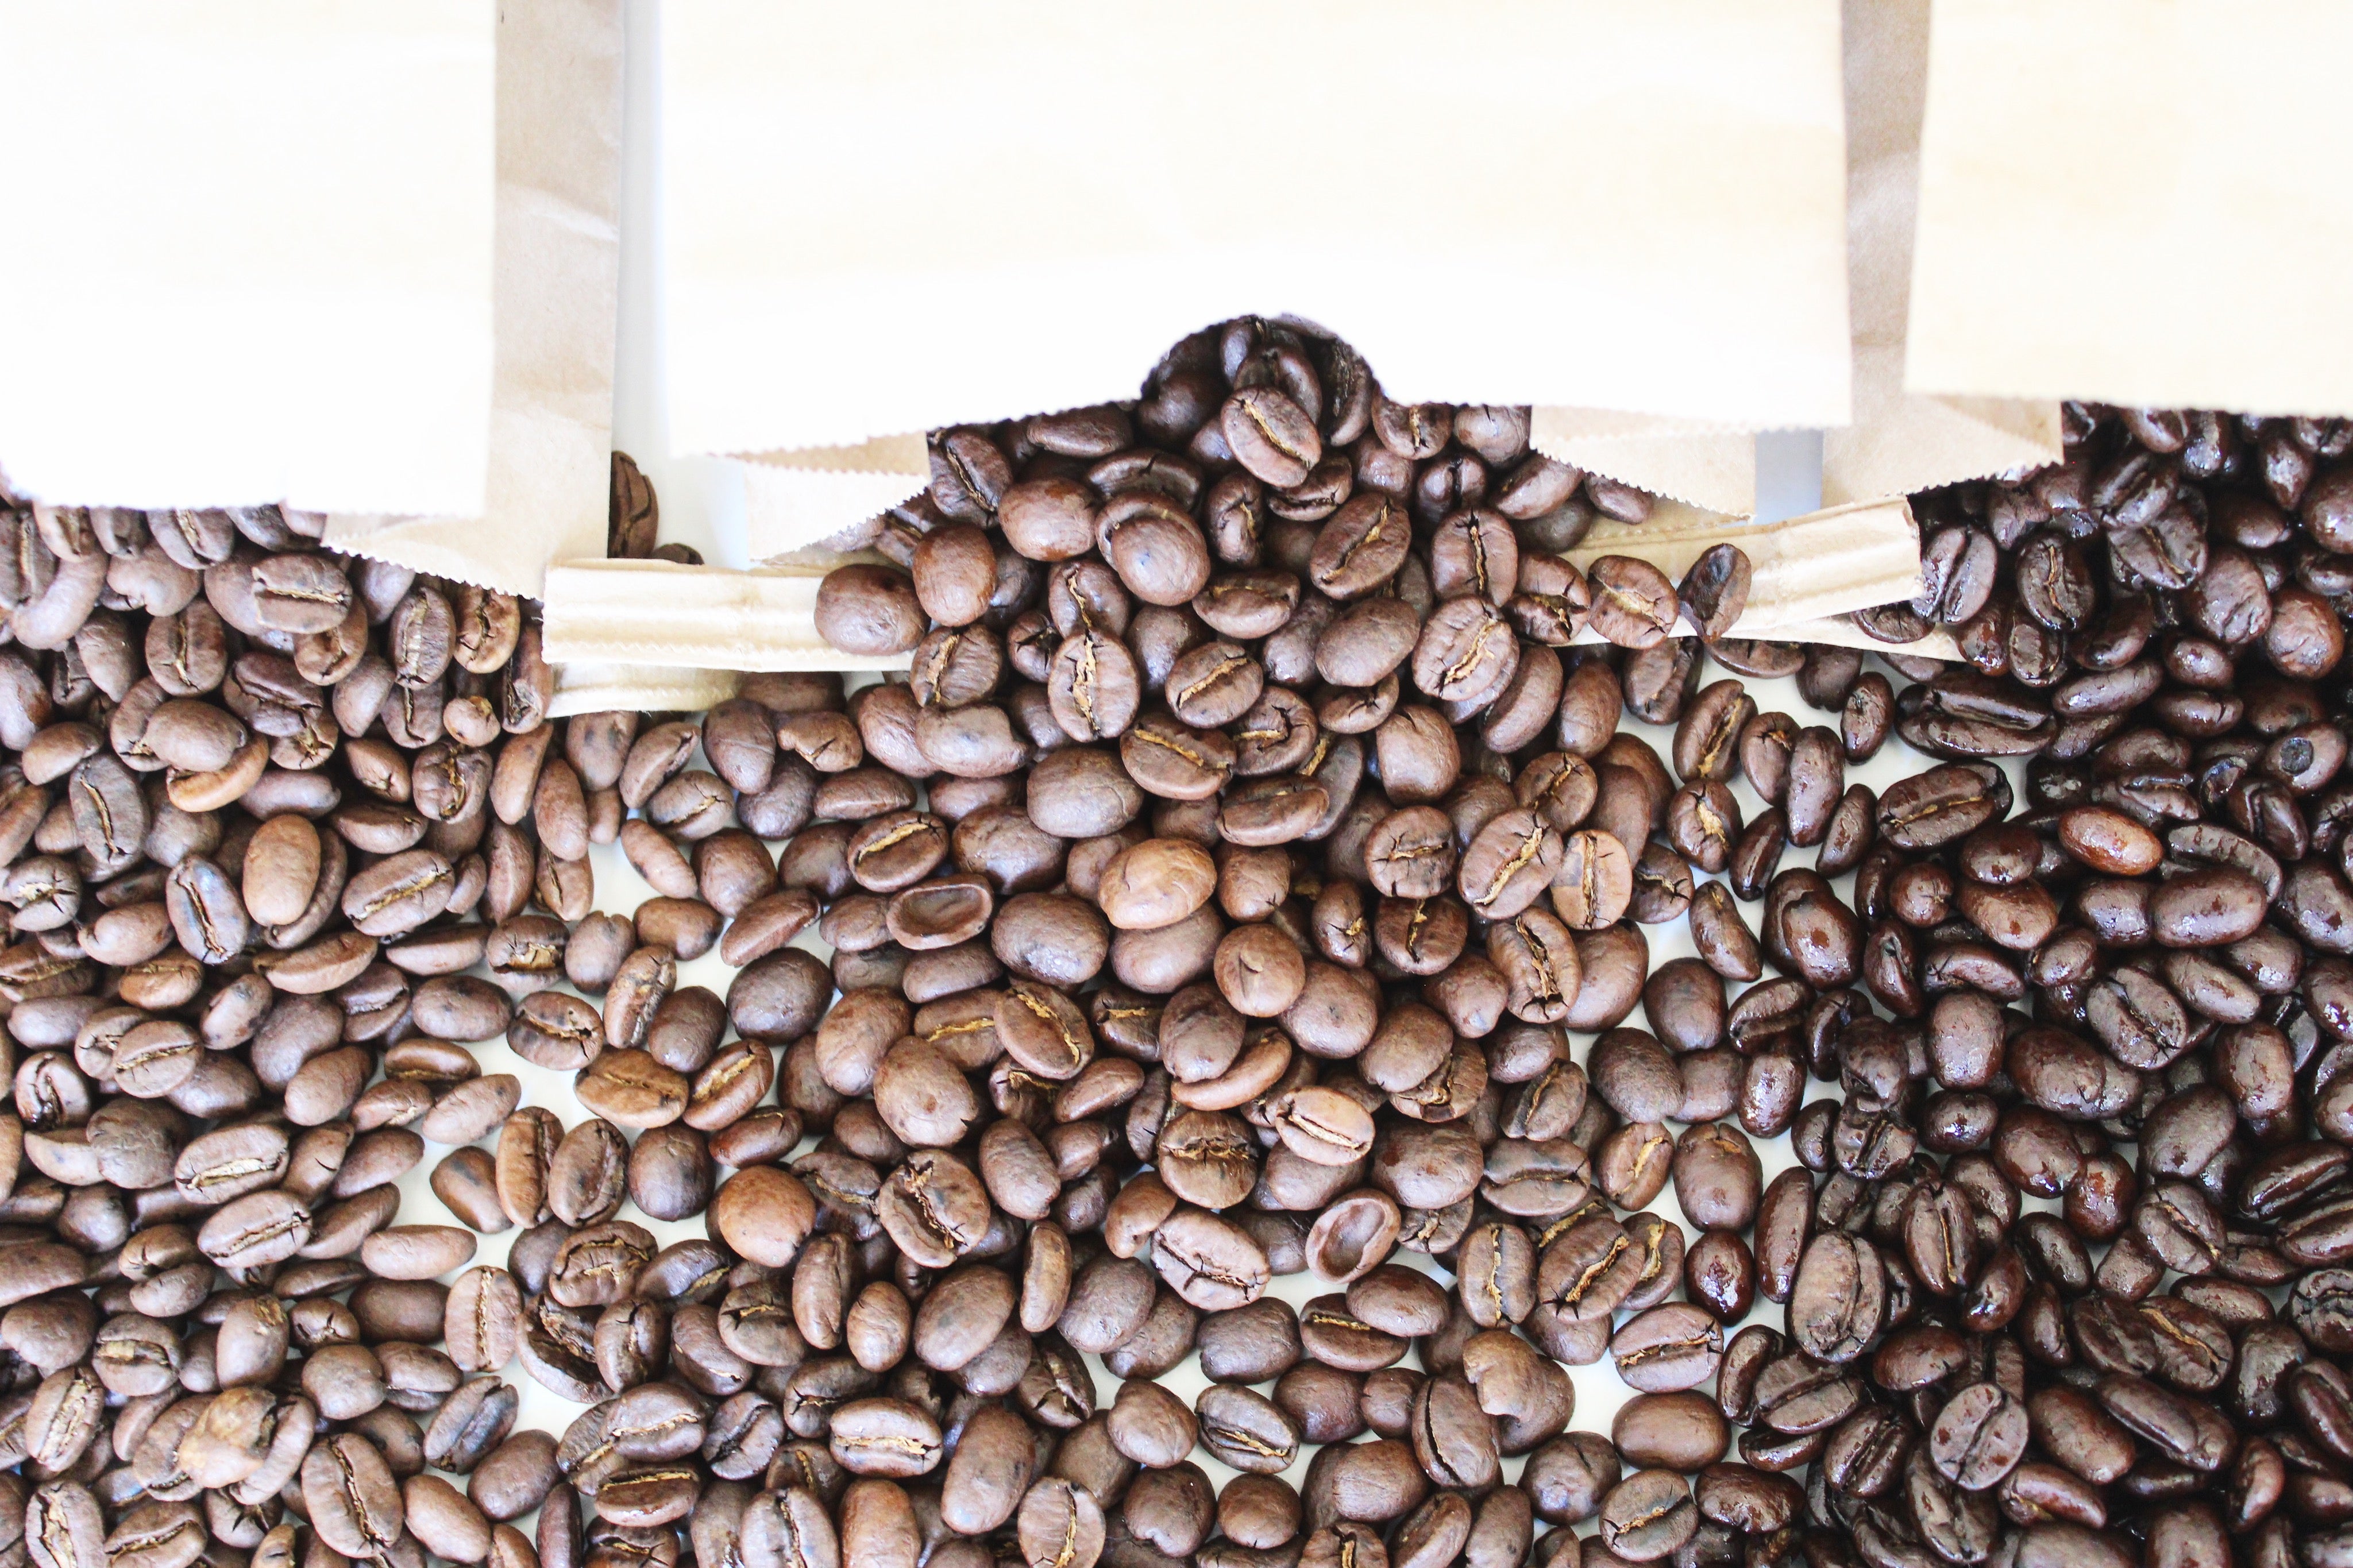 Medium, Dark or Blend Roasts: Do You Know the Difference?